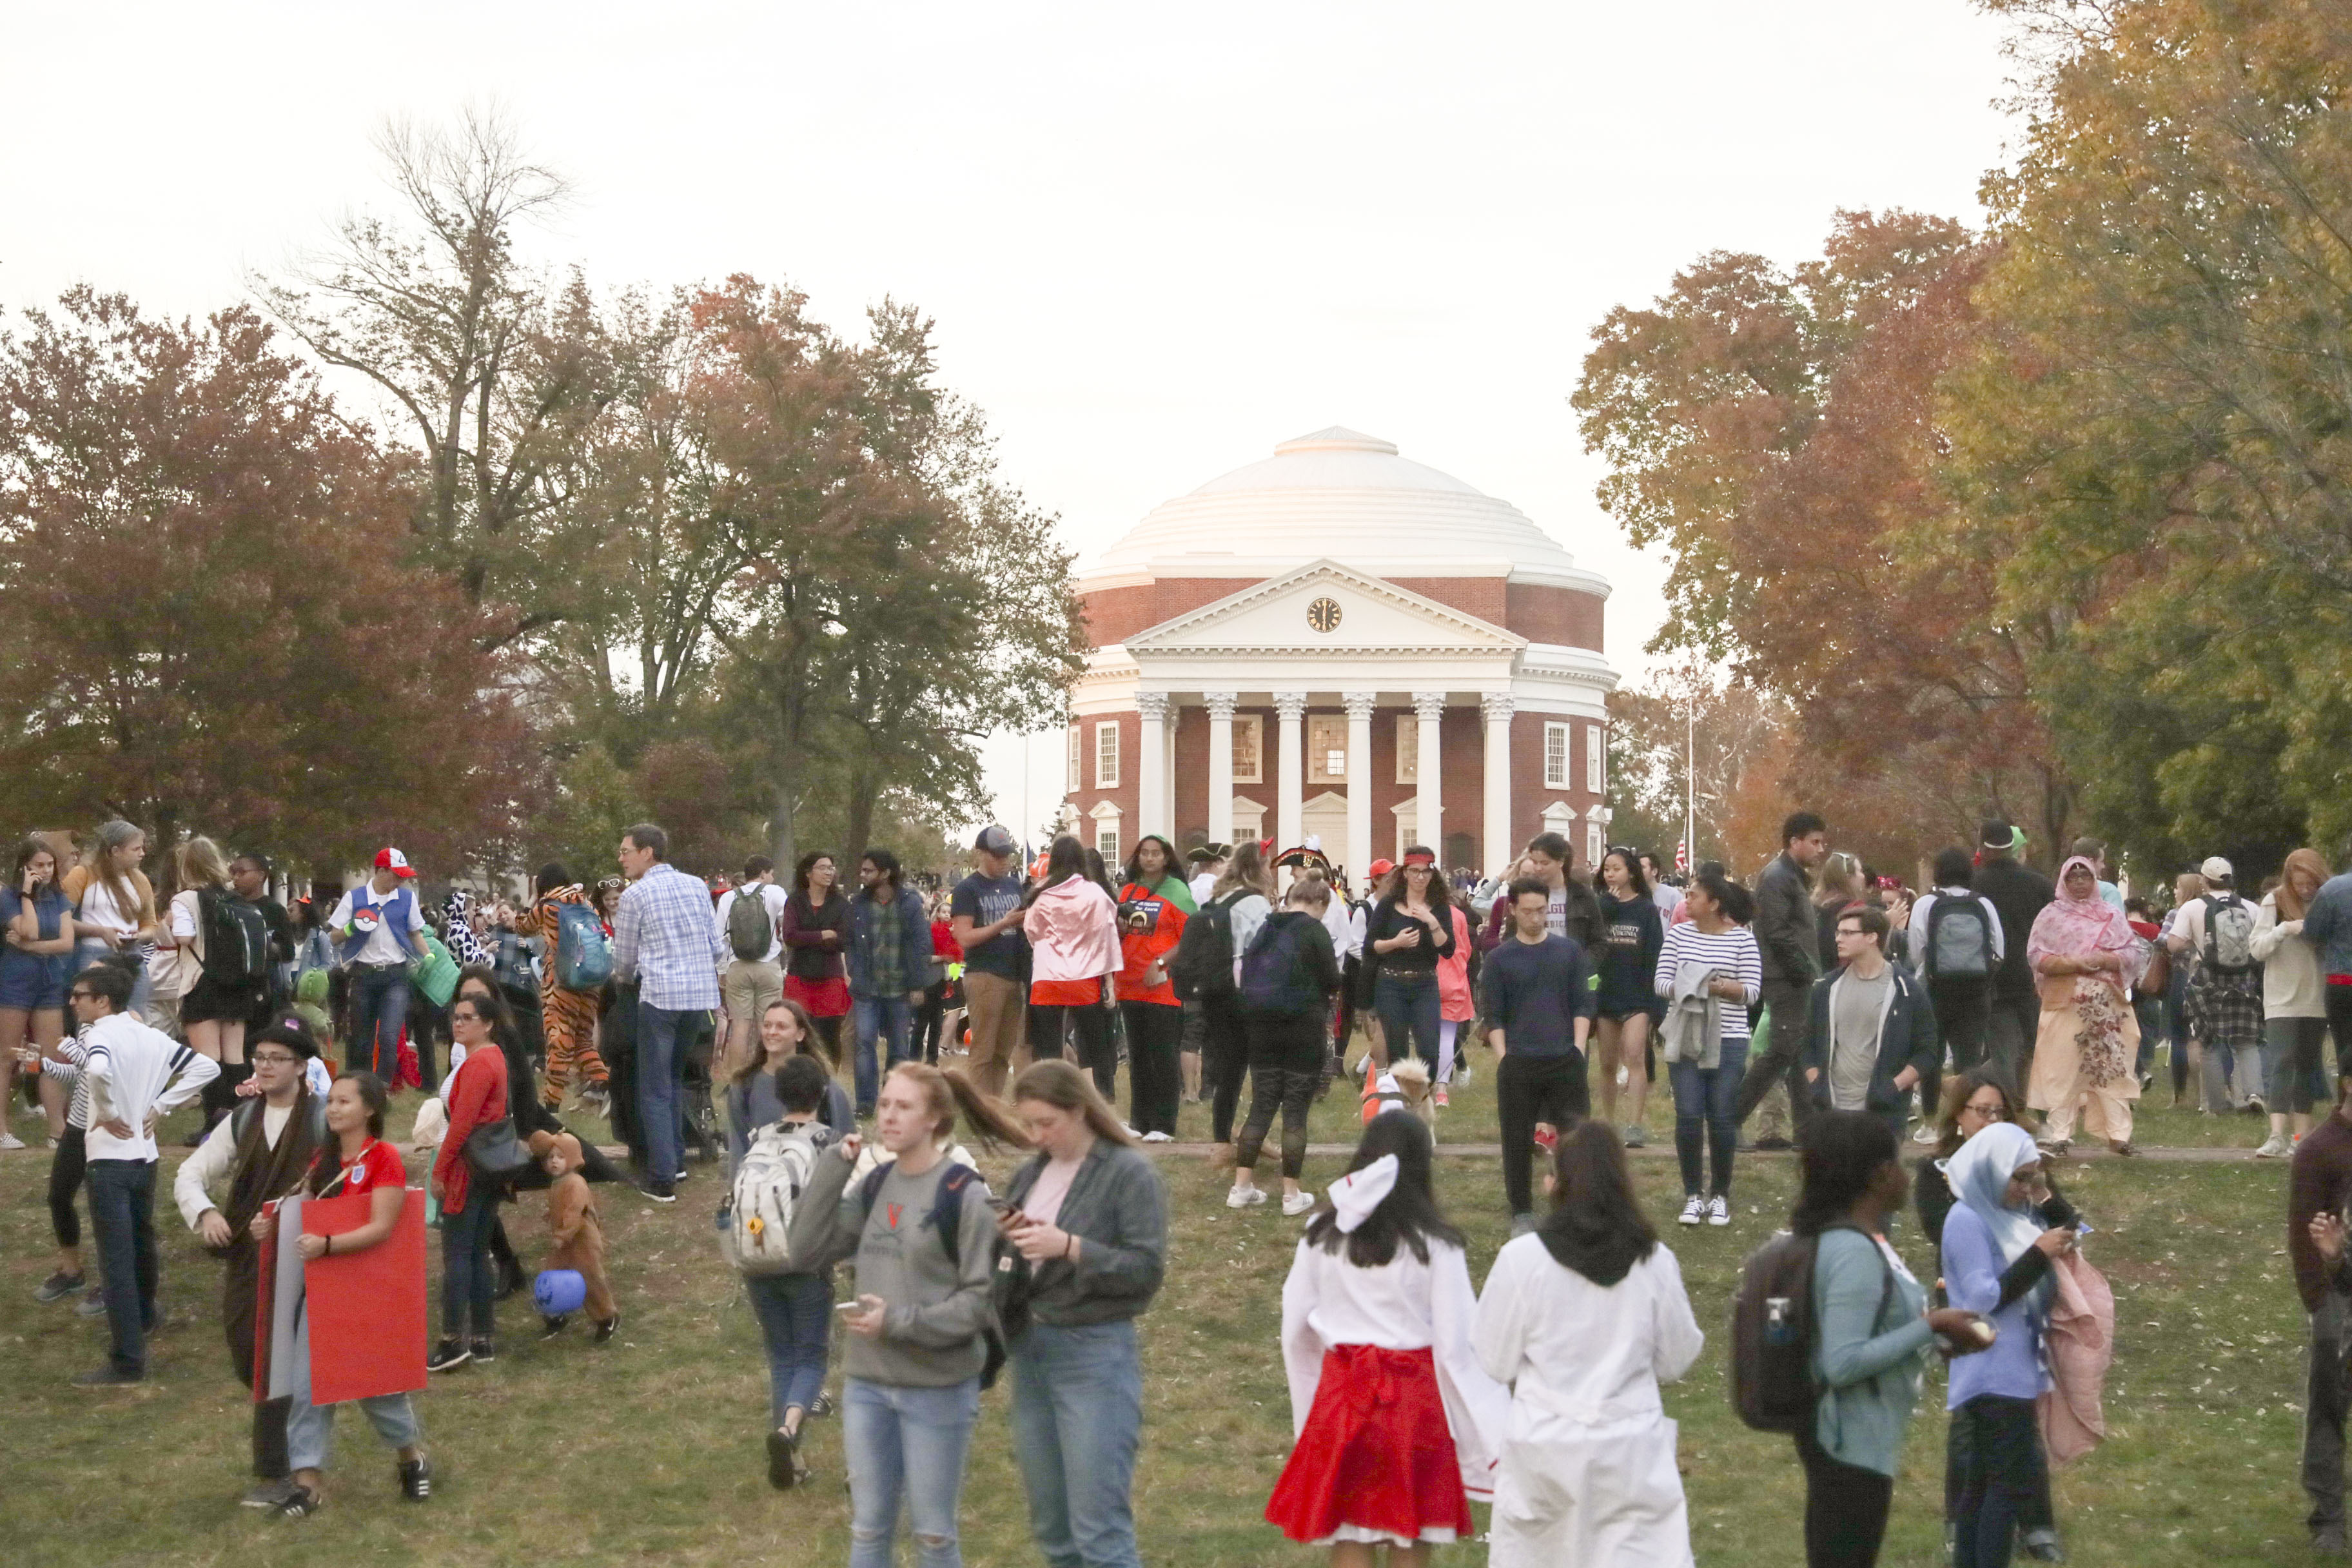 Photos Frightful Fun Was Had by All at UVA’s TrickorTreating on the Lawn